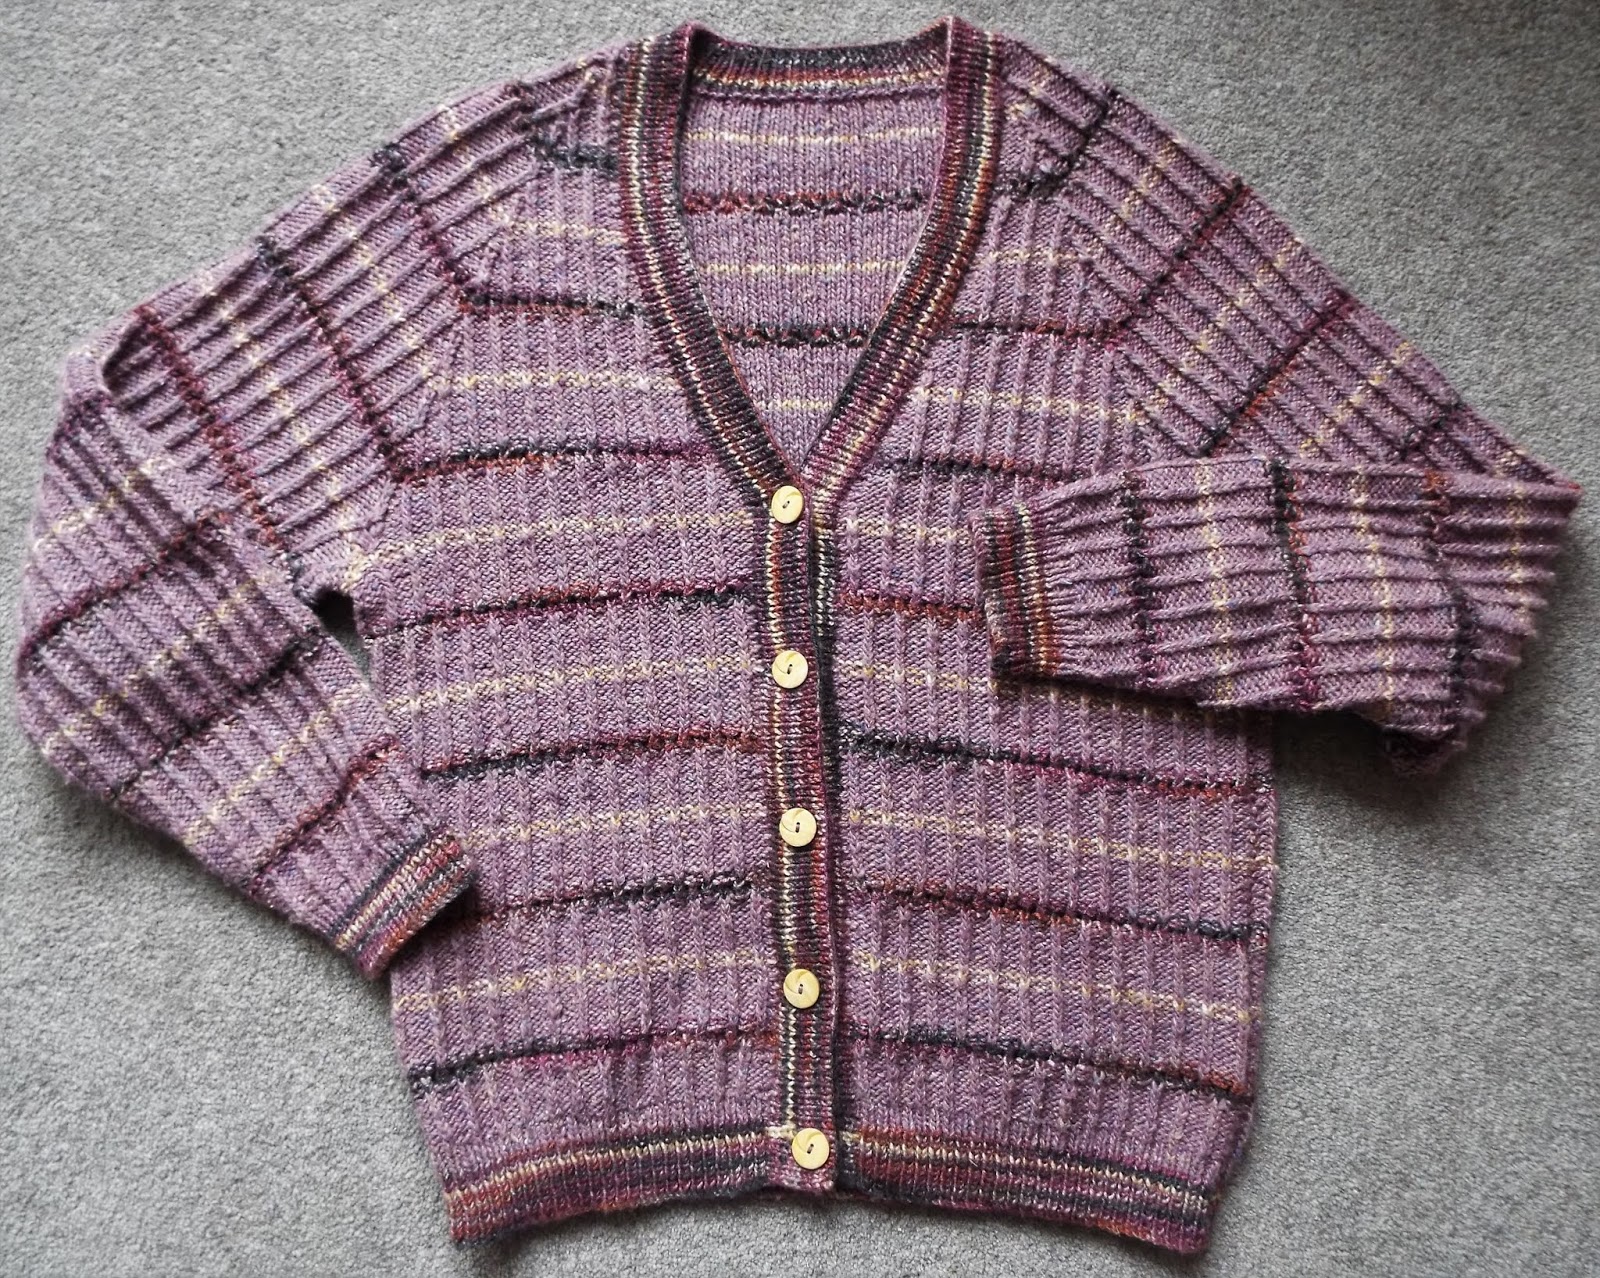 Lizzie Lenard Vintage Sewing: Another Autumn Cardigan